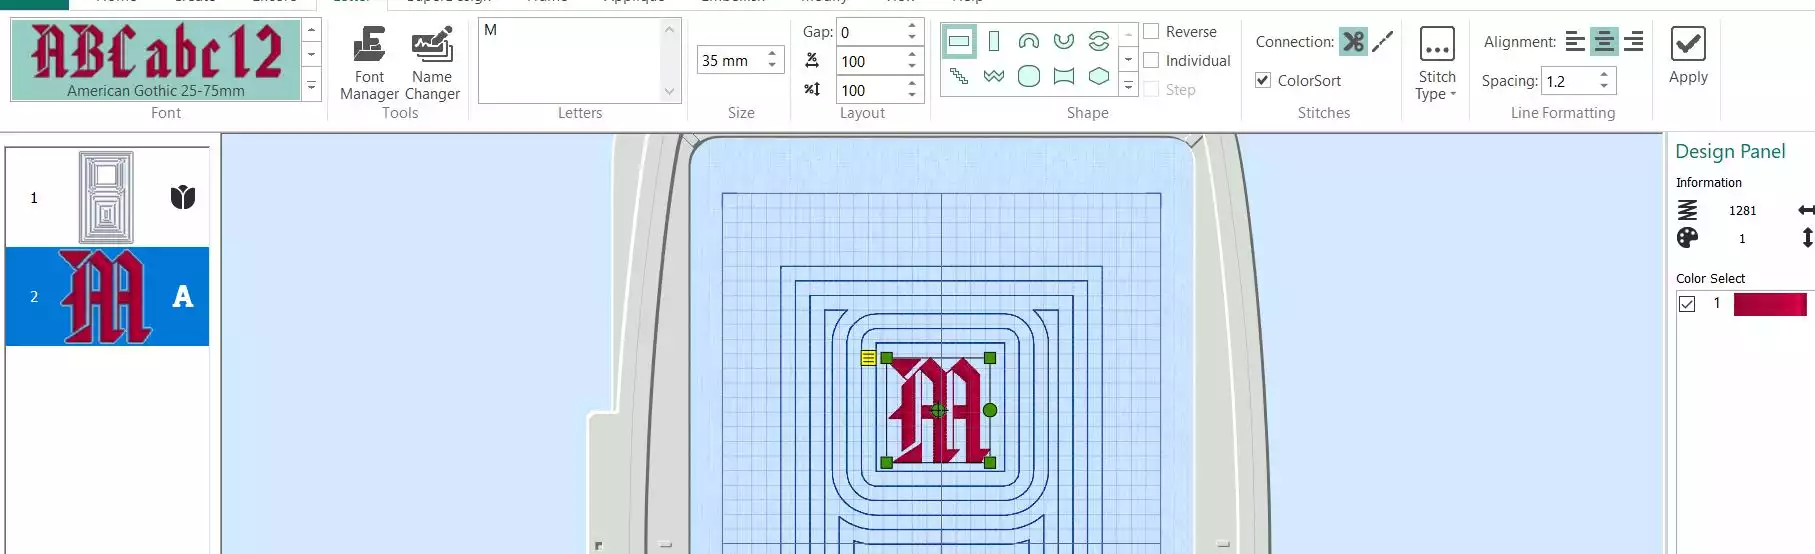 Small-bag-in-the-hoop-with-digitizing-instructions-step44-place-monogram-in-design.jpg